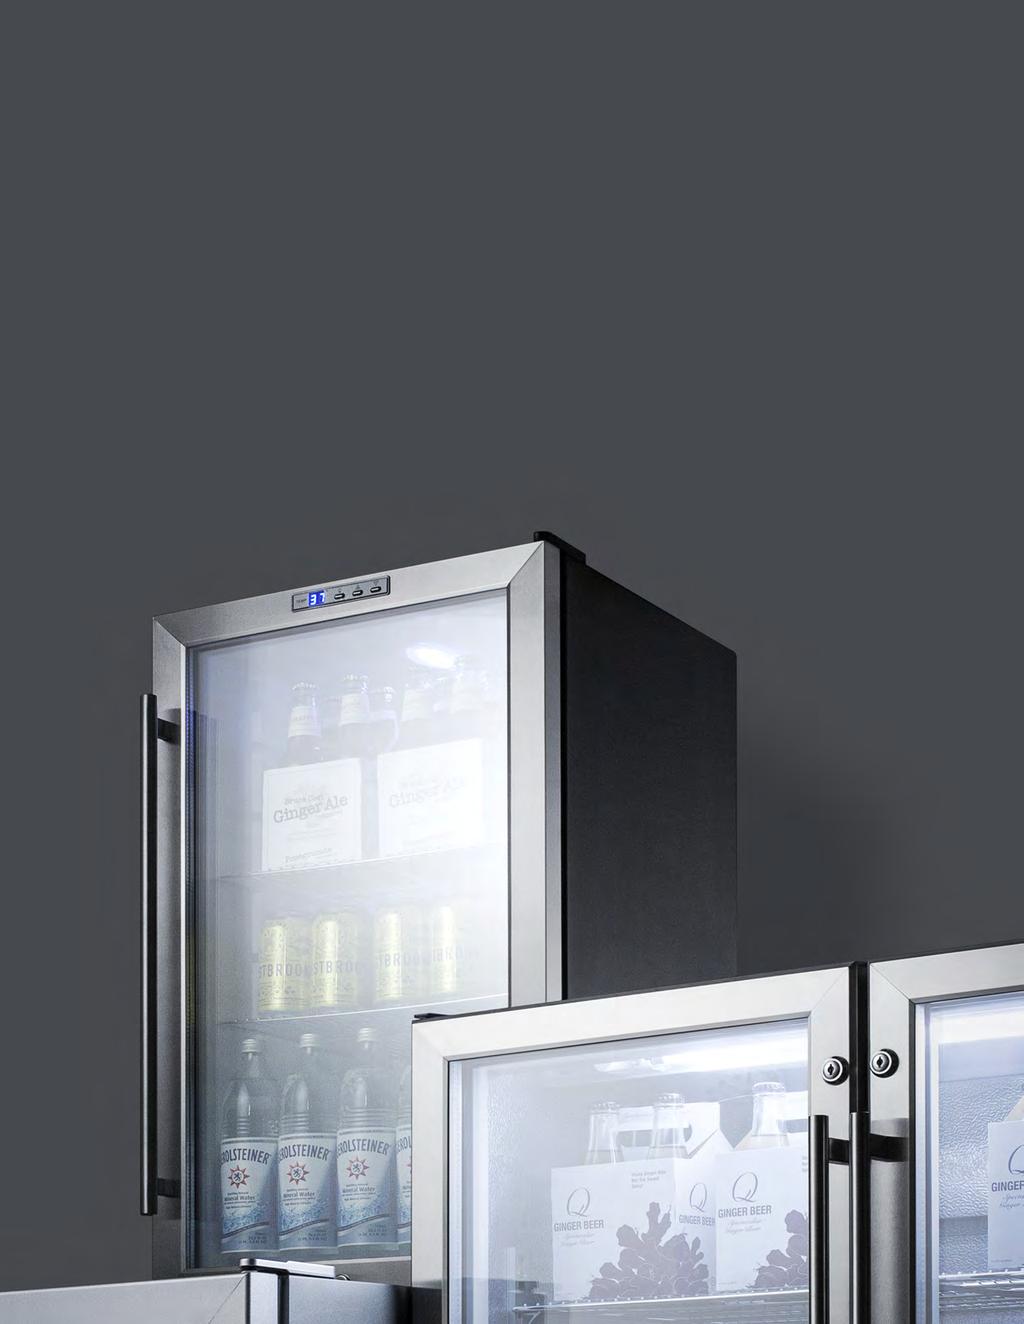 Countertop, Back Bar, & Undercounter Beverage Centers & Display Freezers COMMERCIAL PRODUCT LINE FEATURES* Fast temperature recovery to ensure stored items stay cold Factory installed keyed locks